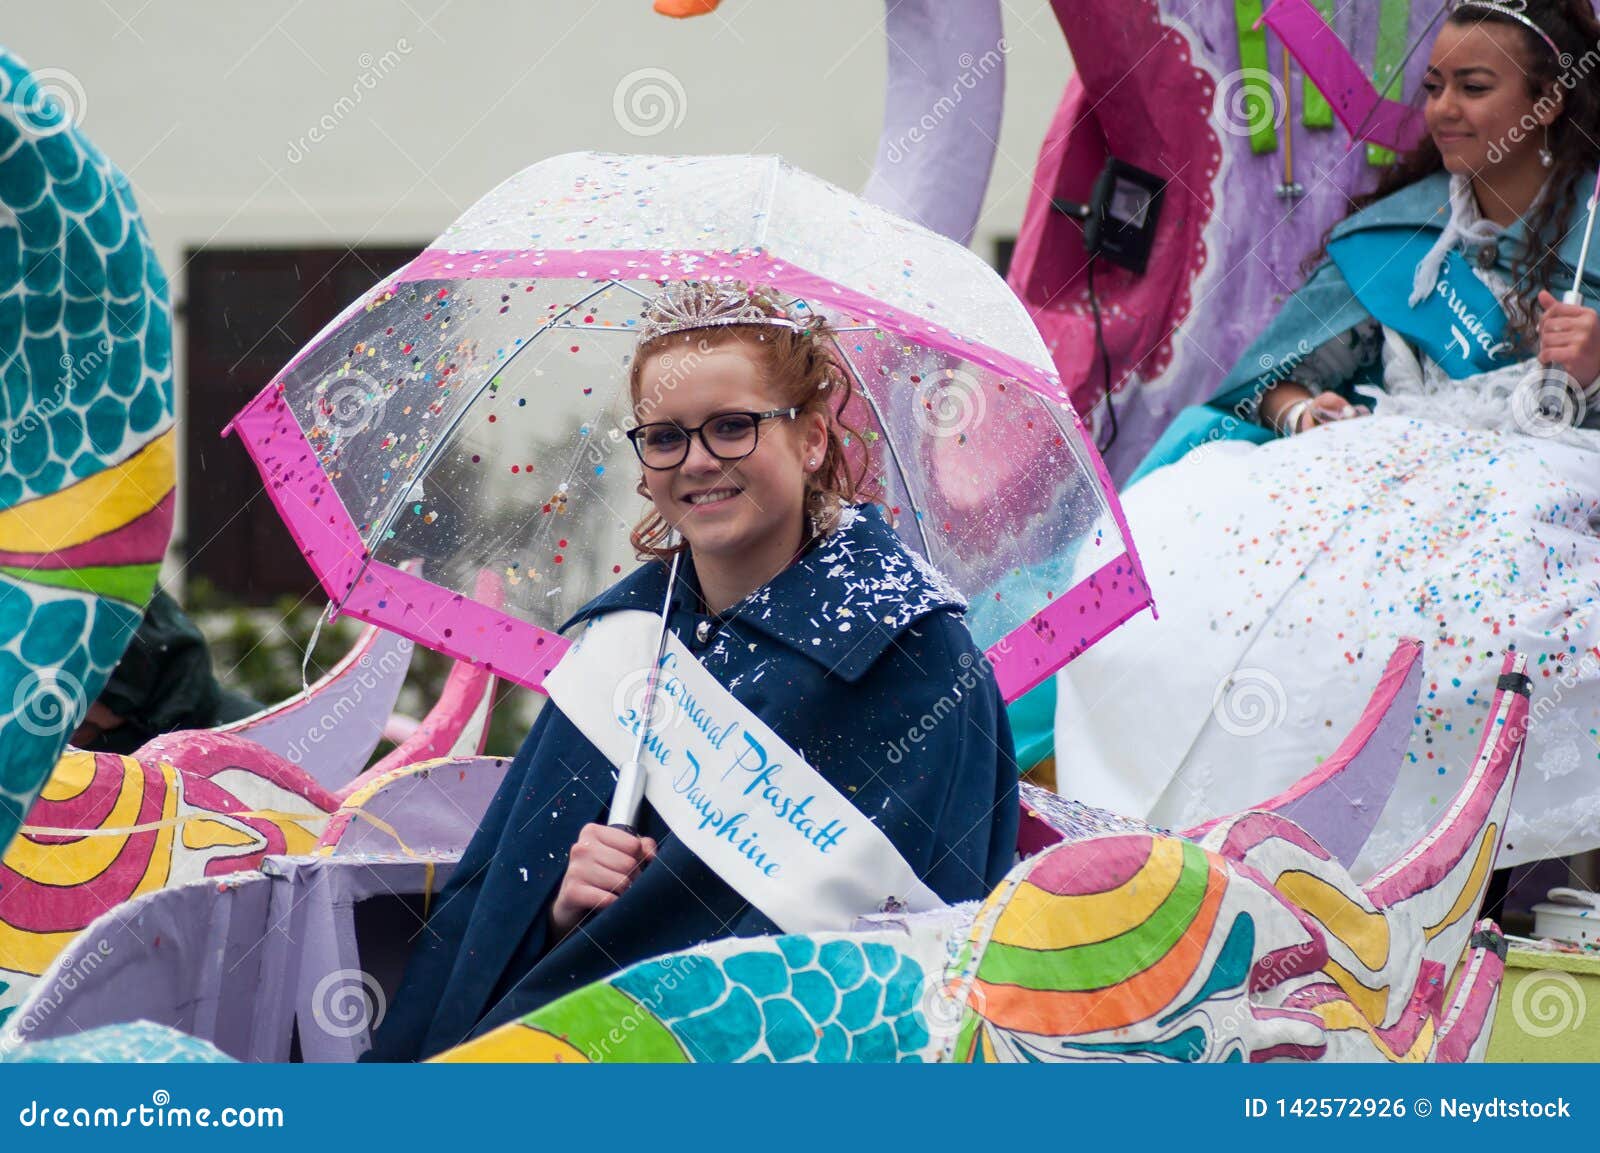 Portrait of Miss Carnaval Smiling with Umbrella during the Parade in ...